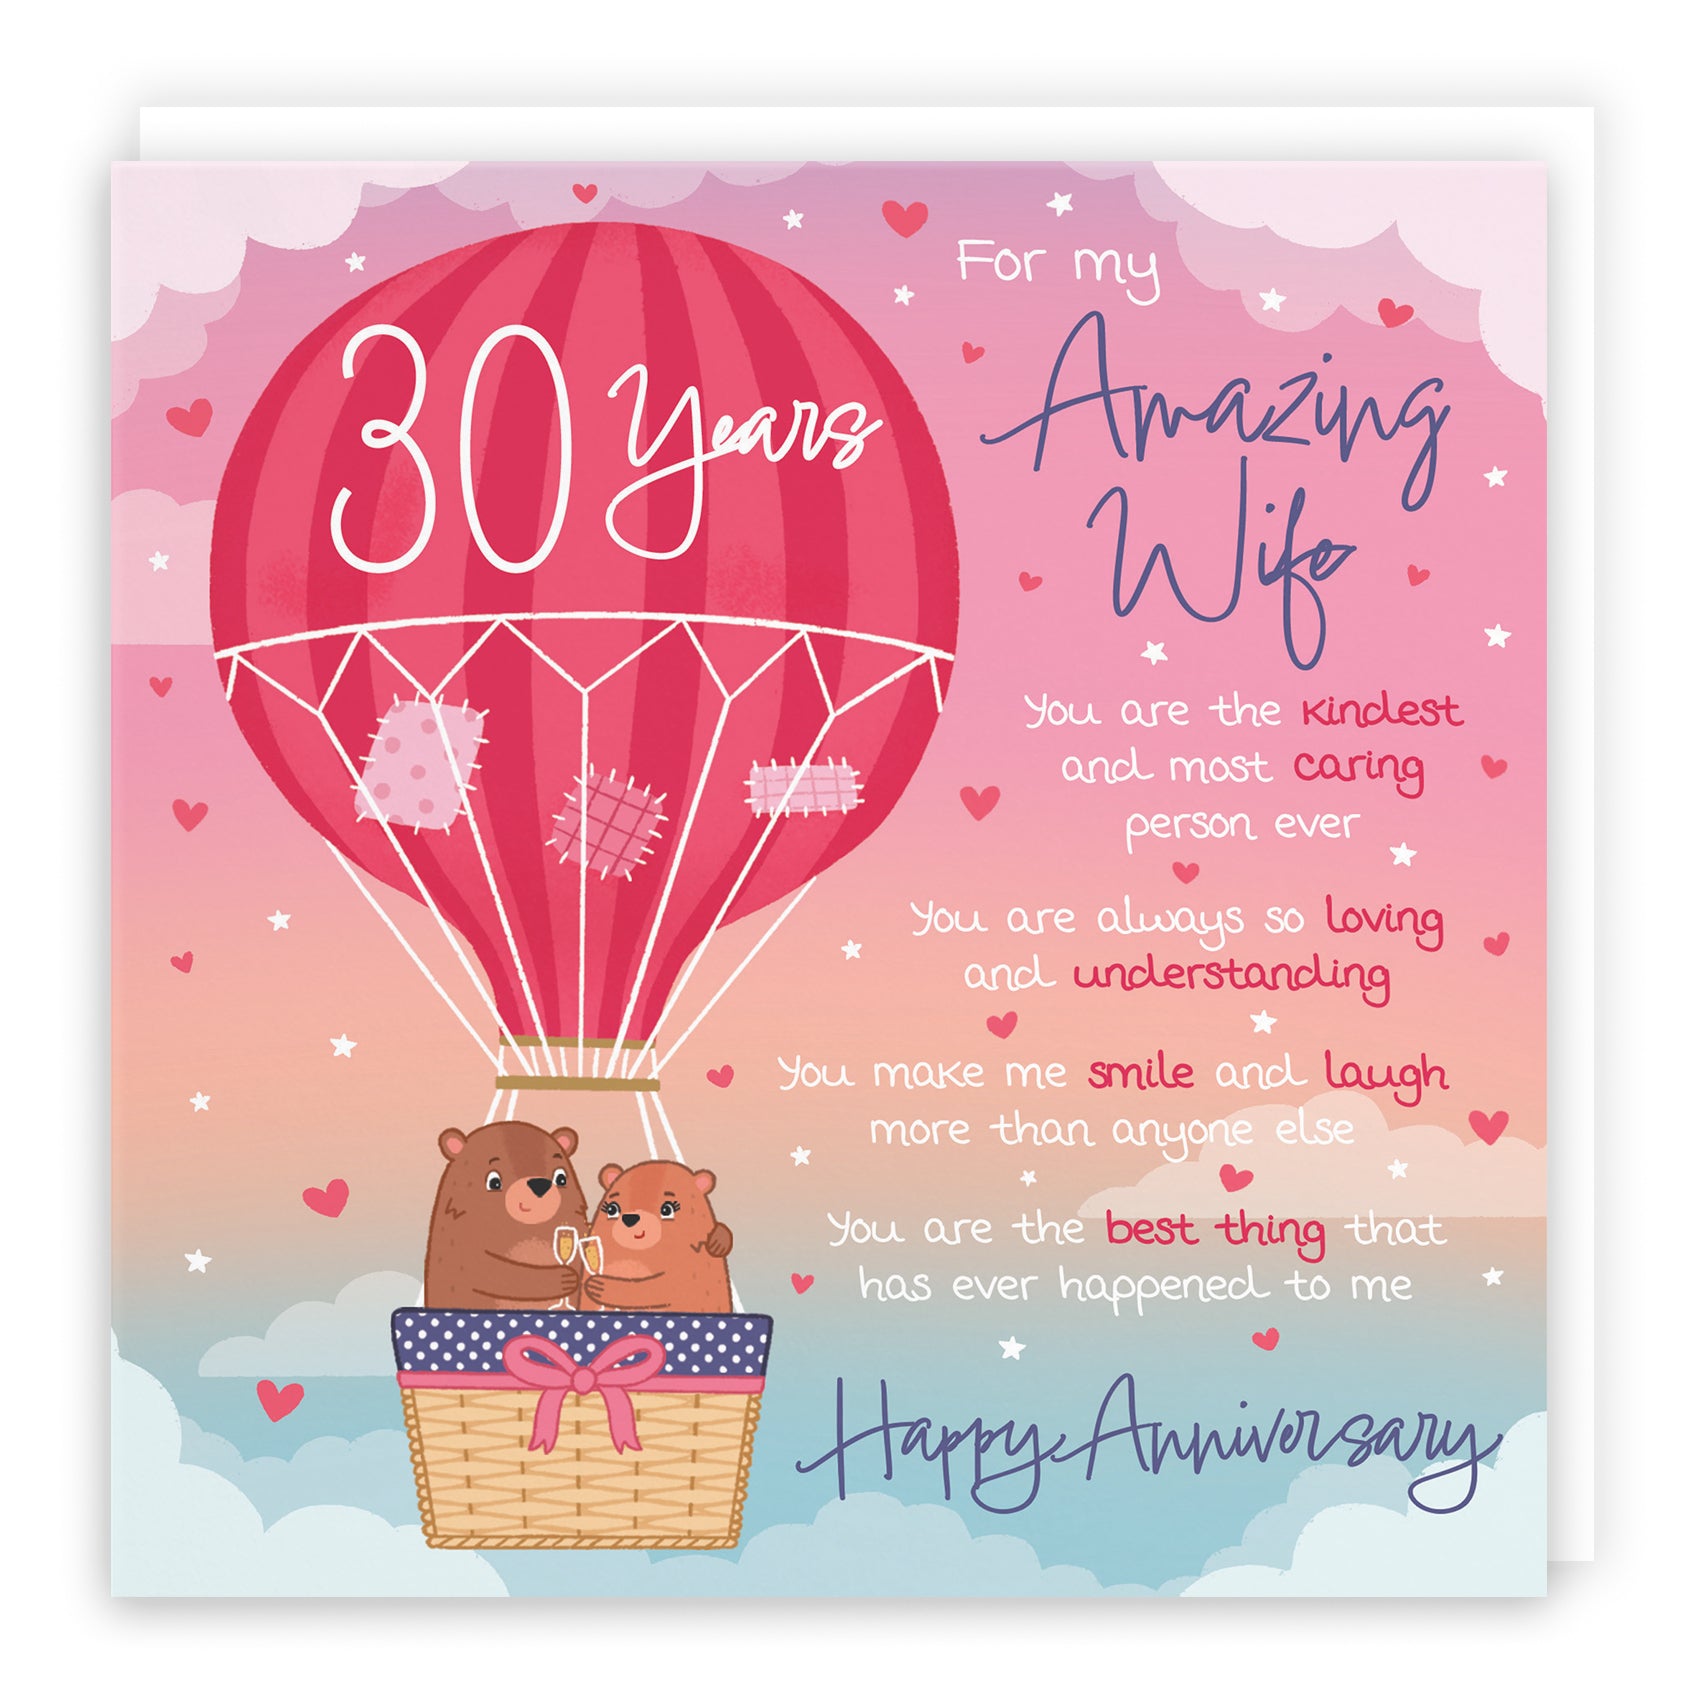 Wife 30th Anniversary Poem Card Love Is In The Air Cute Bears